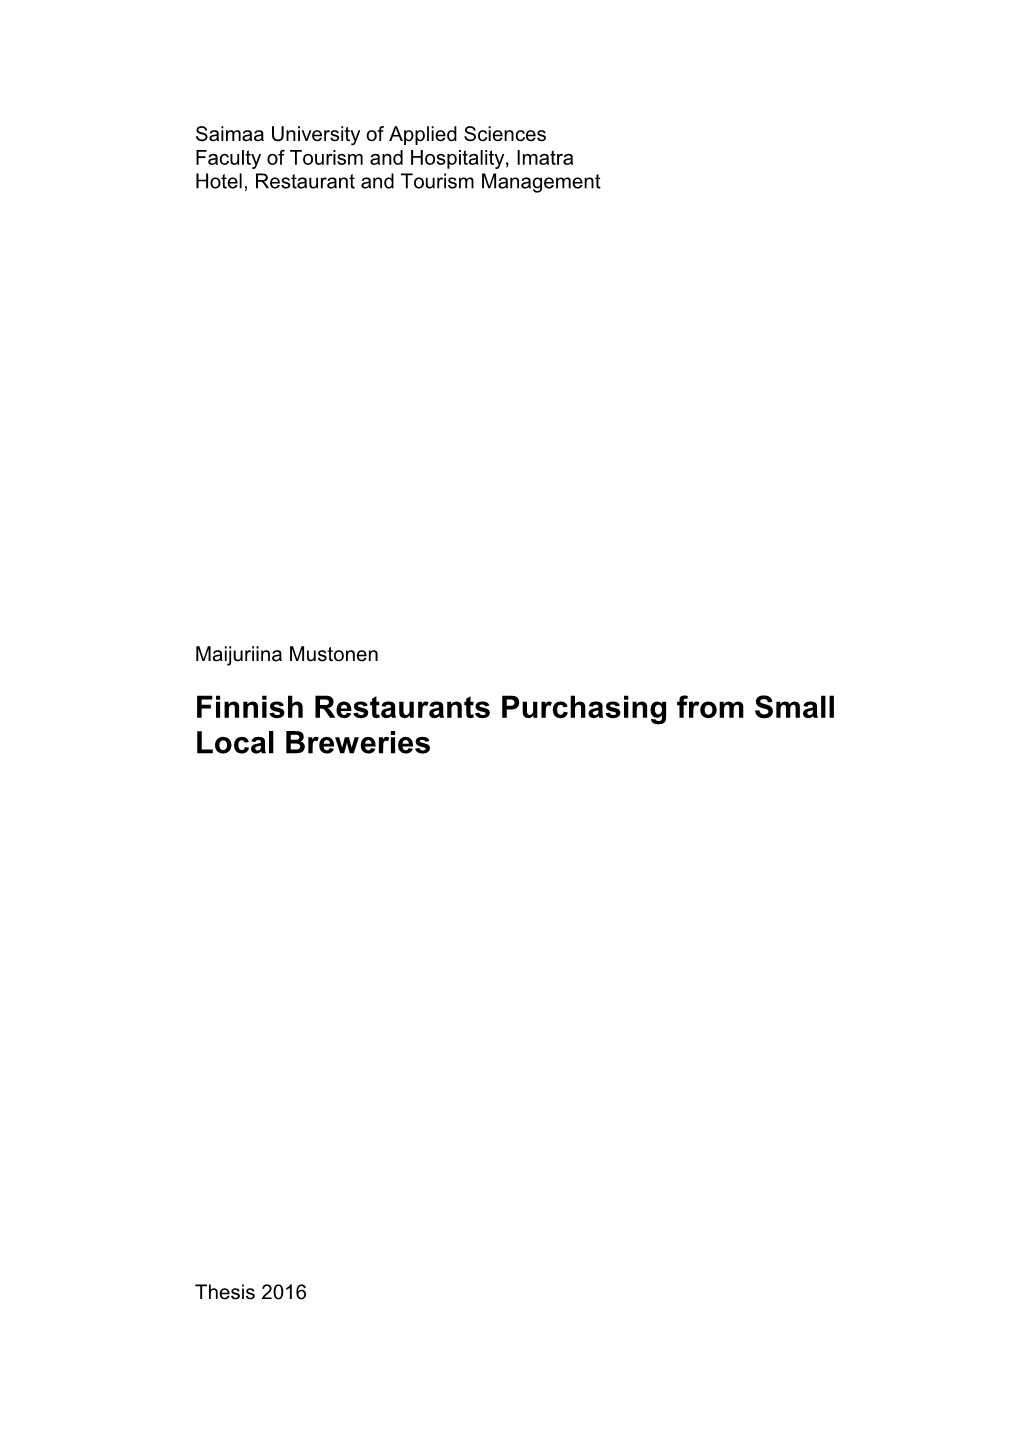 Finnish Restaurants Purchasing from Small Local Breweries